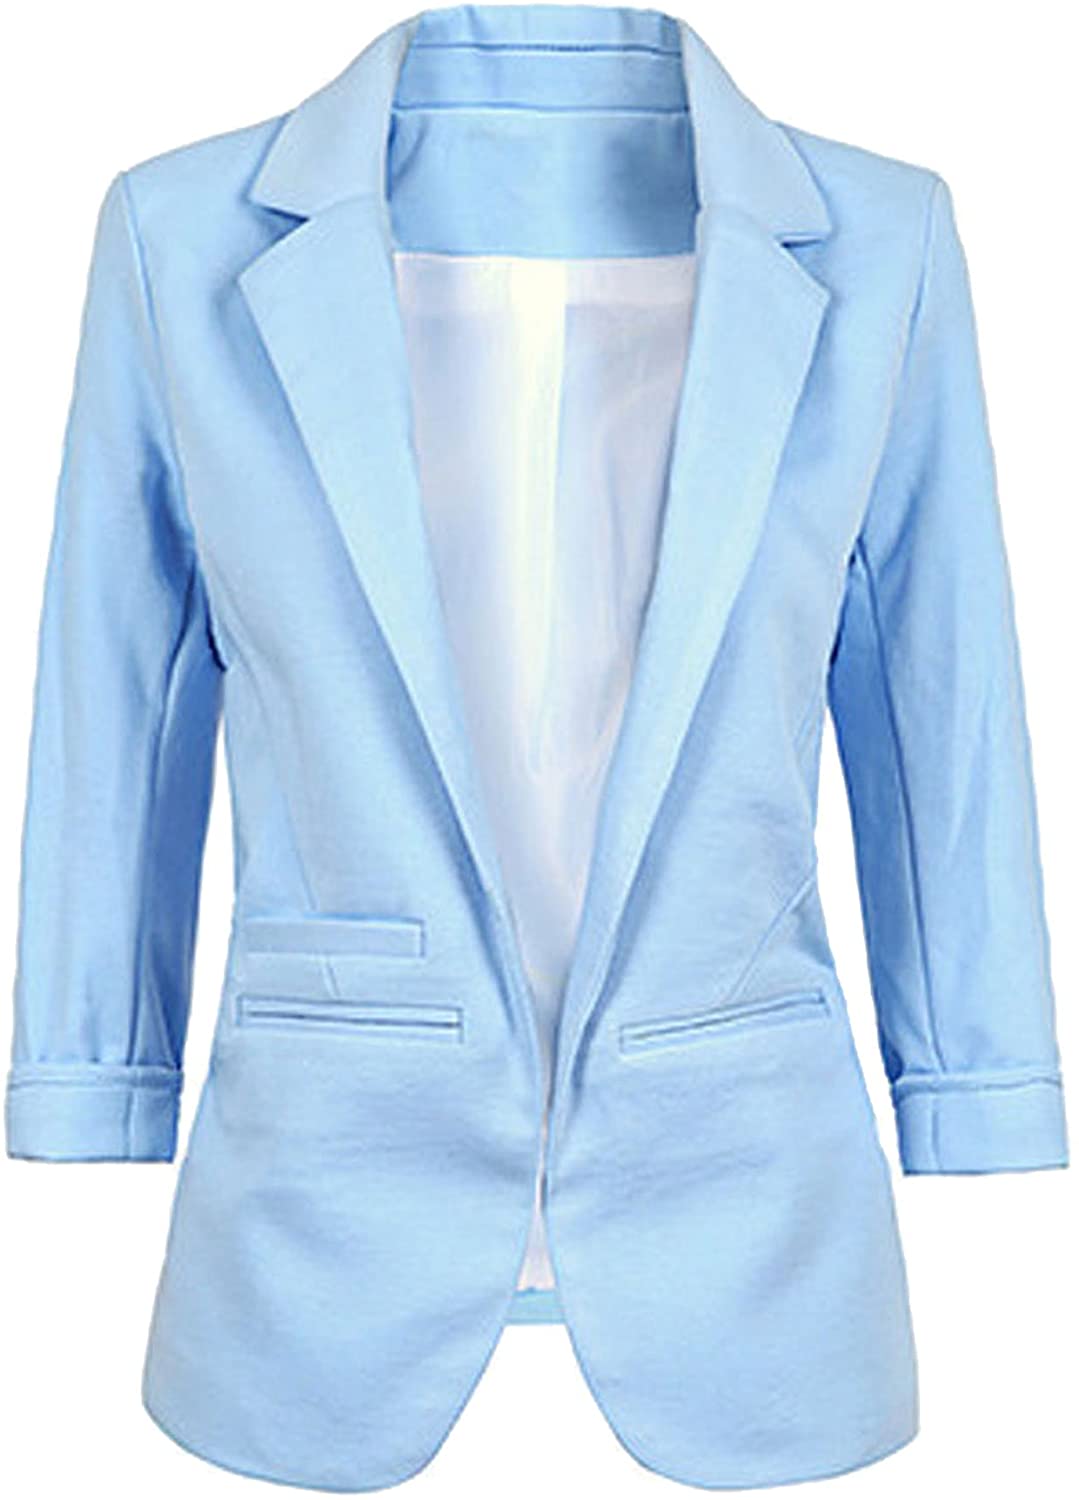 FACE N FACE Womens Cotton Rolled Up Sleeve No-Buckle Blazer Jacket Suits